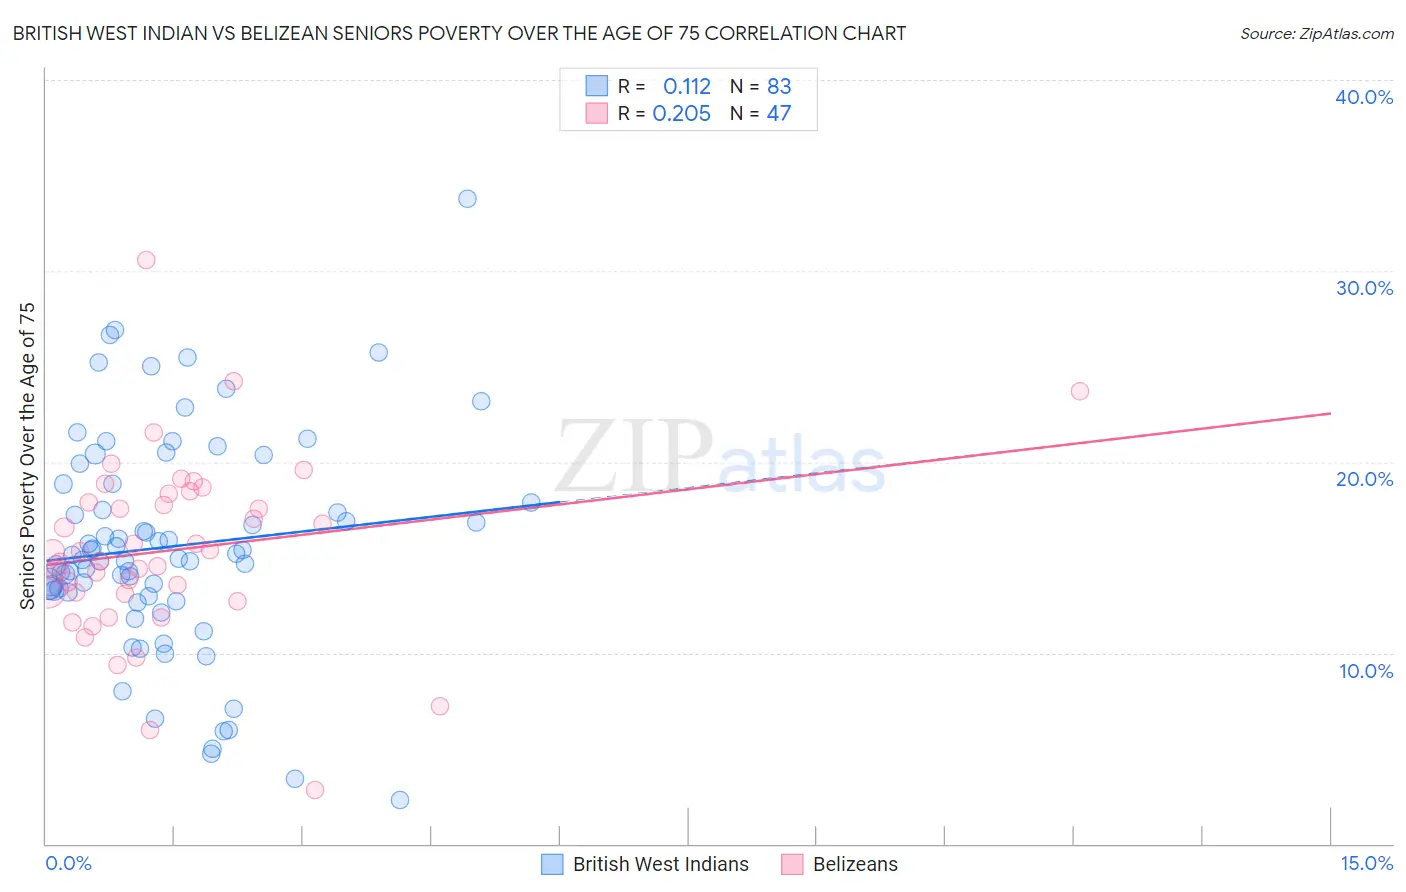 British West Indian vs Belizean Seniors Poverty Over the Age of 75